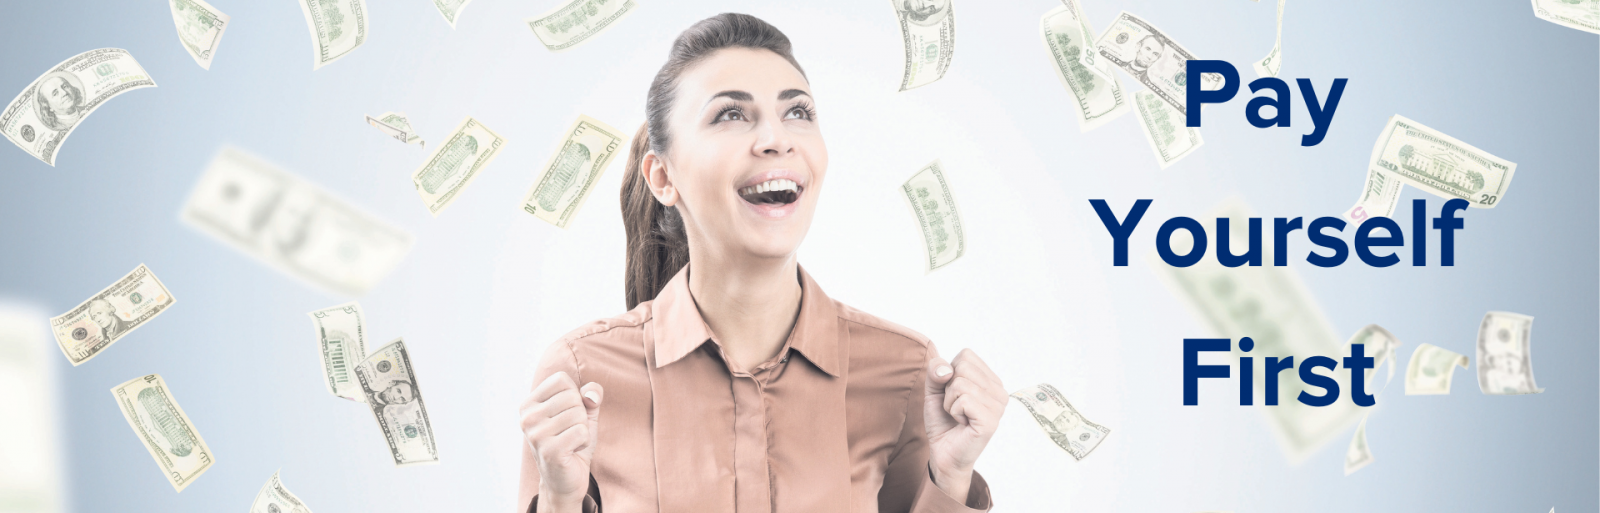 woman throwing money into the air with caption pay yourself first